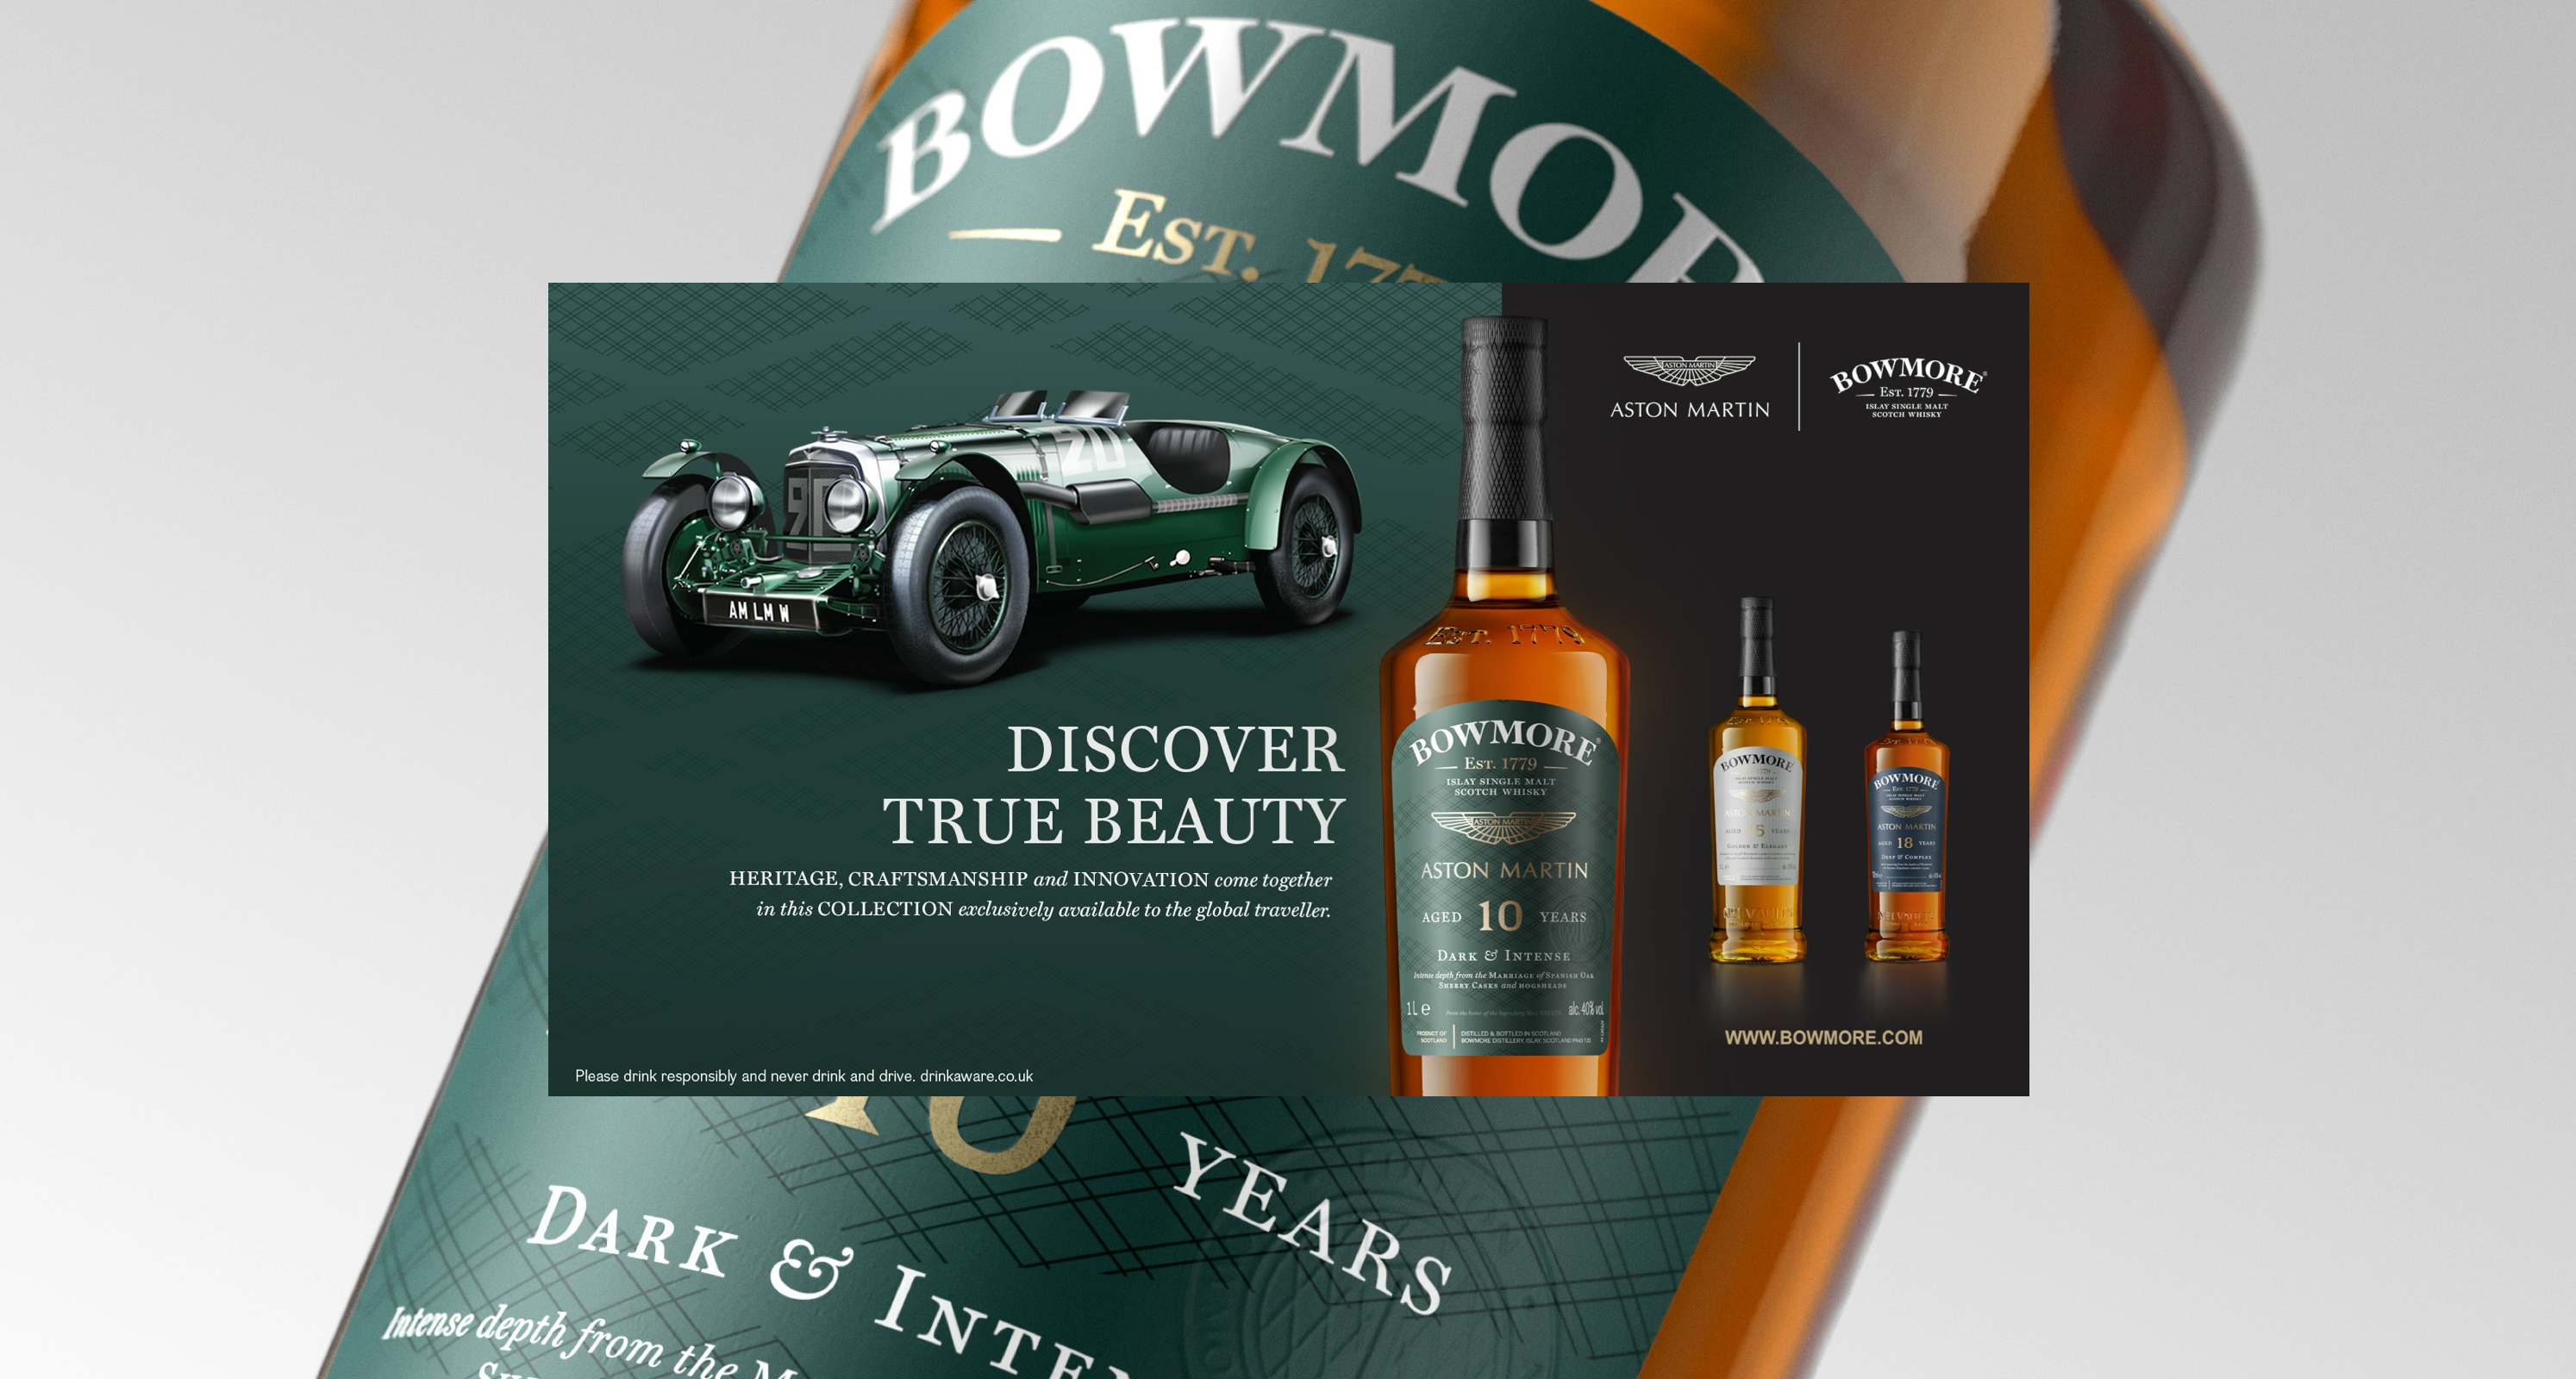 All Three Bowmore Aston Martin whisky bottles and a classic Aston Martin Le Mans Work car showcase the Bowmore Aston Martin 10 year old whisky bottle in this example print image created by More Yum. "DISCOVER TRUE BEAUTY: Heritage craftsmanship and innovation come together in this collection exclusively available to the global traveler". You can discover more at www.bowmore.com